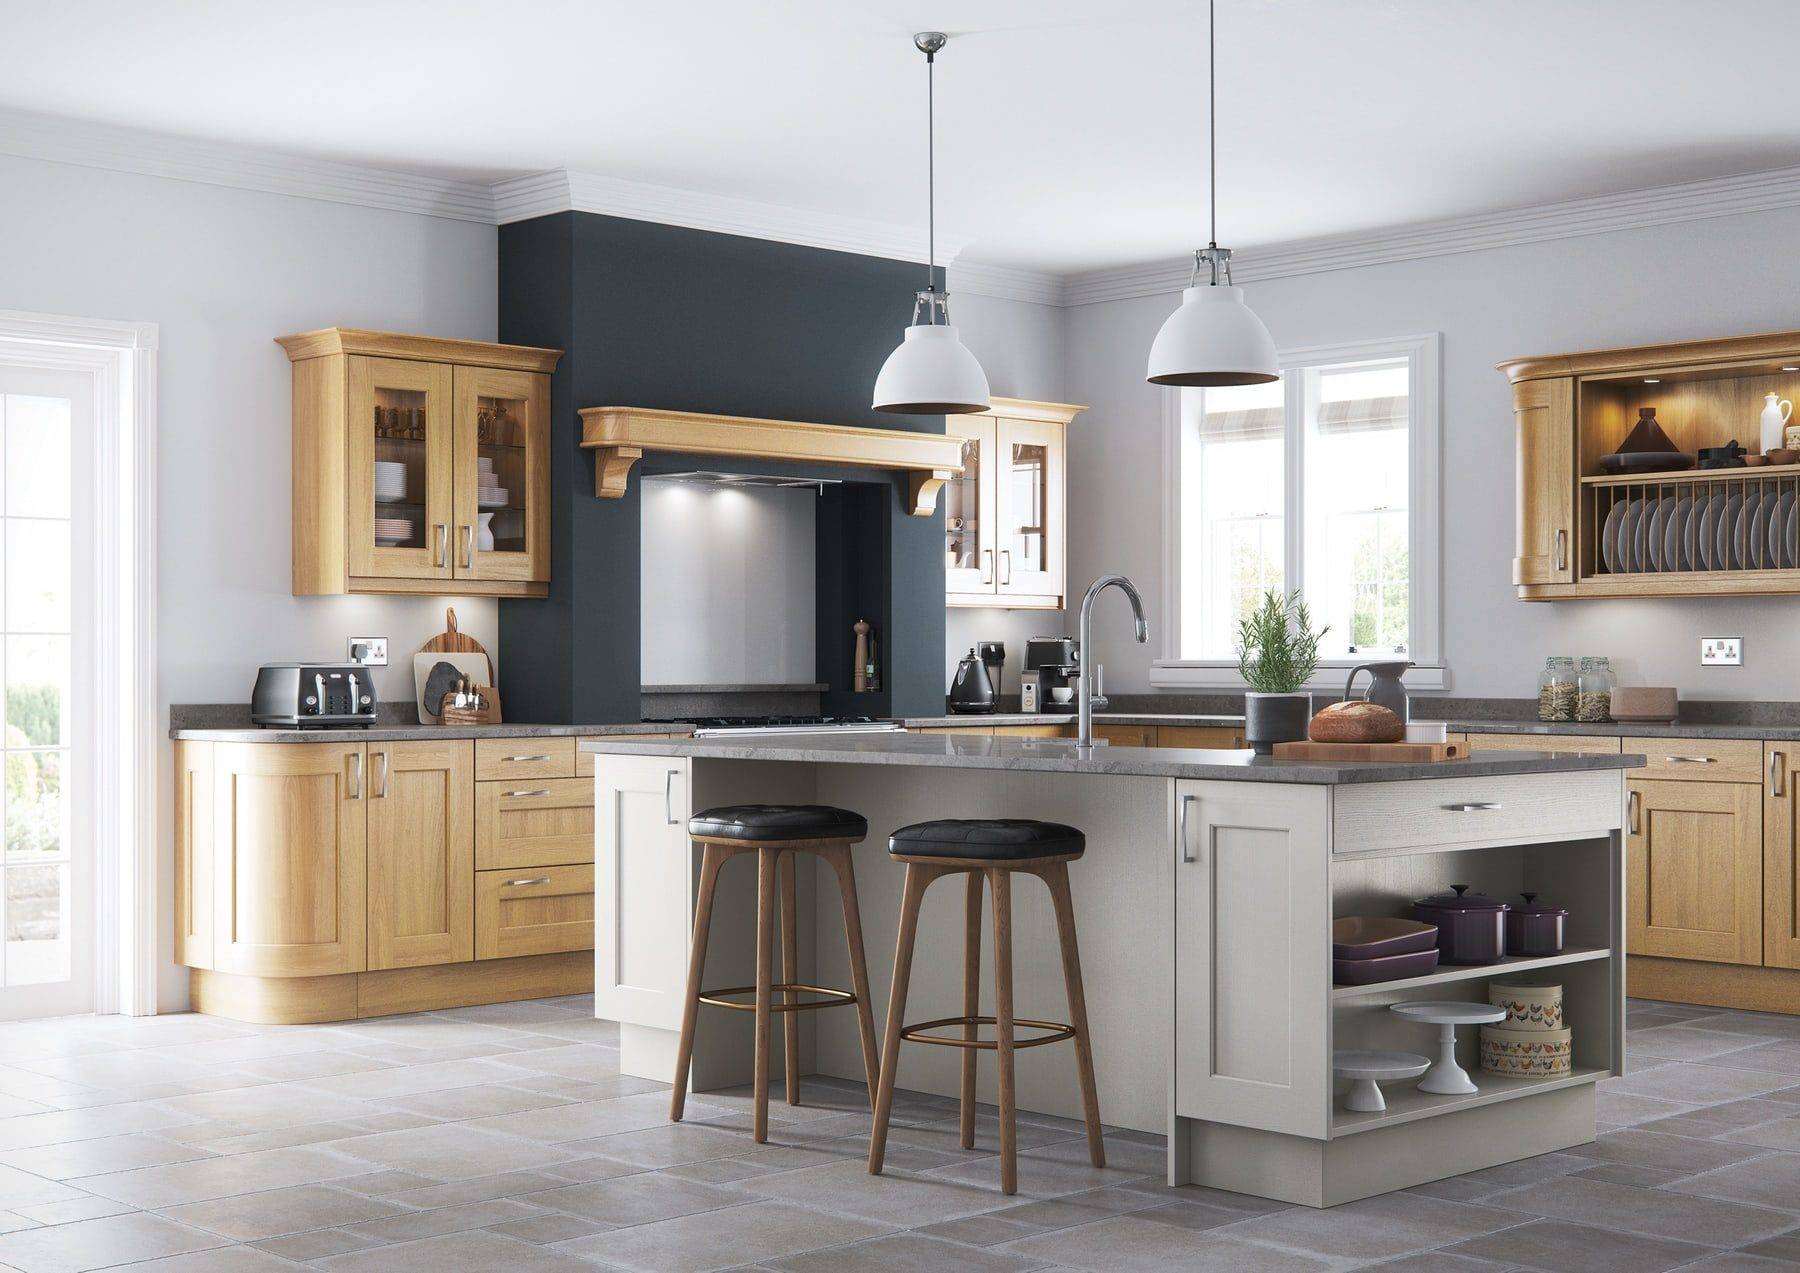 Wakefield Light Oak And Stone Shaker Kitchen With Island | Colourhill, Mansfield